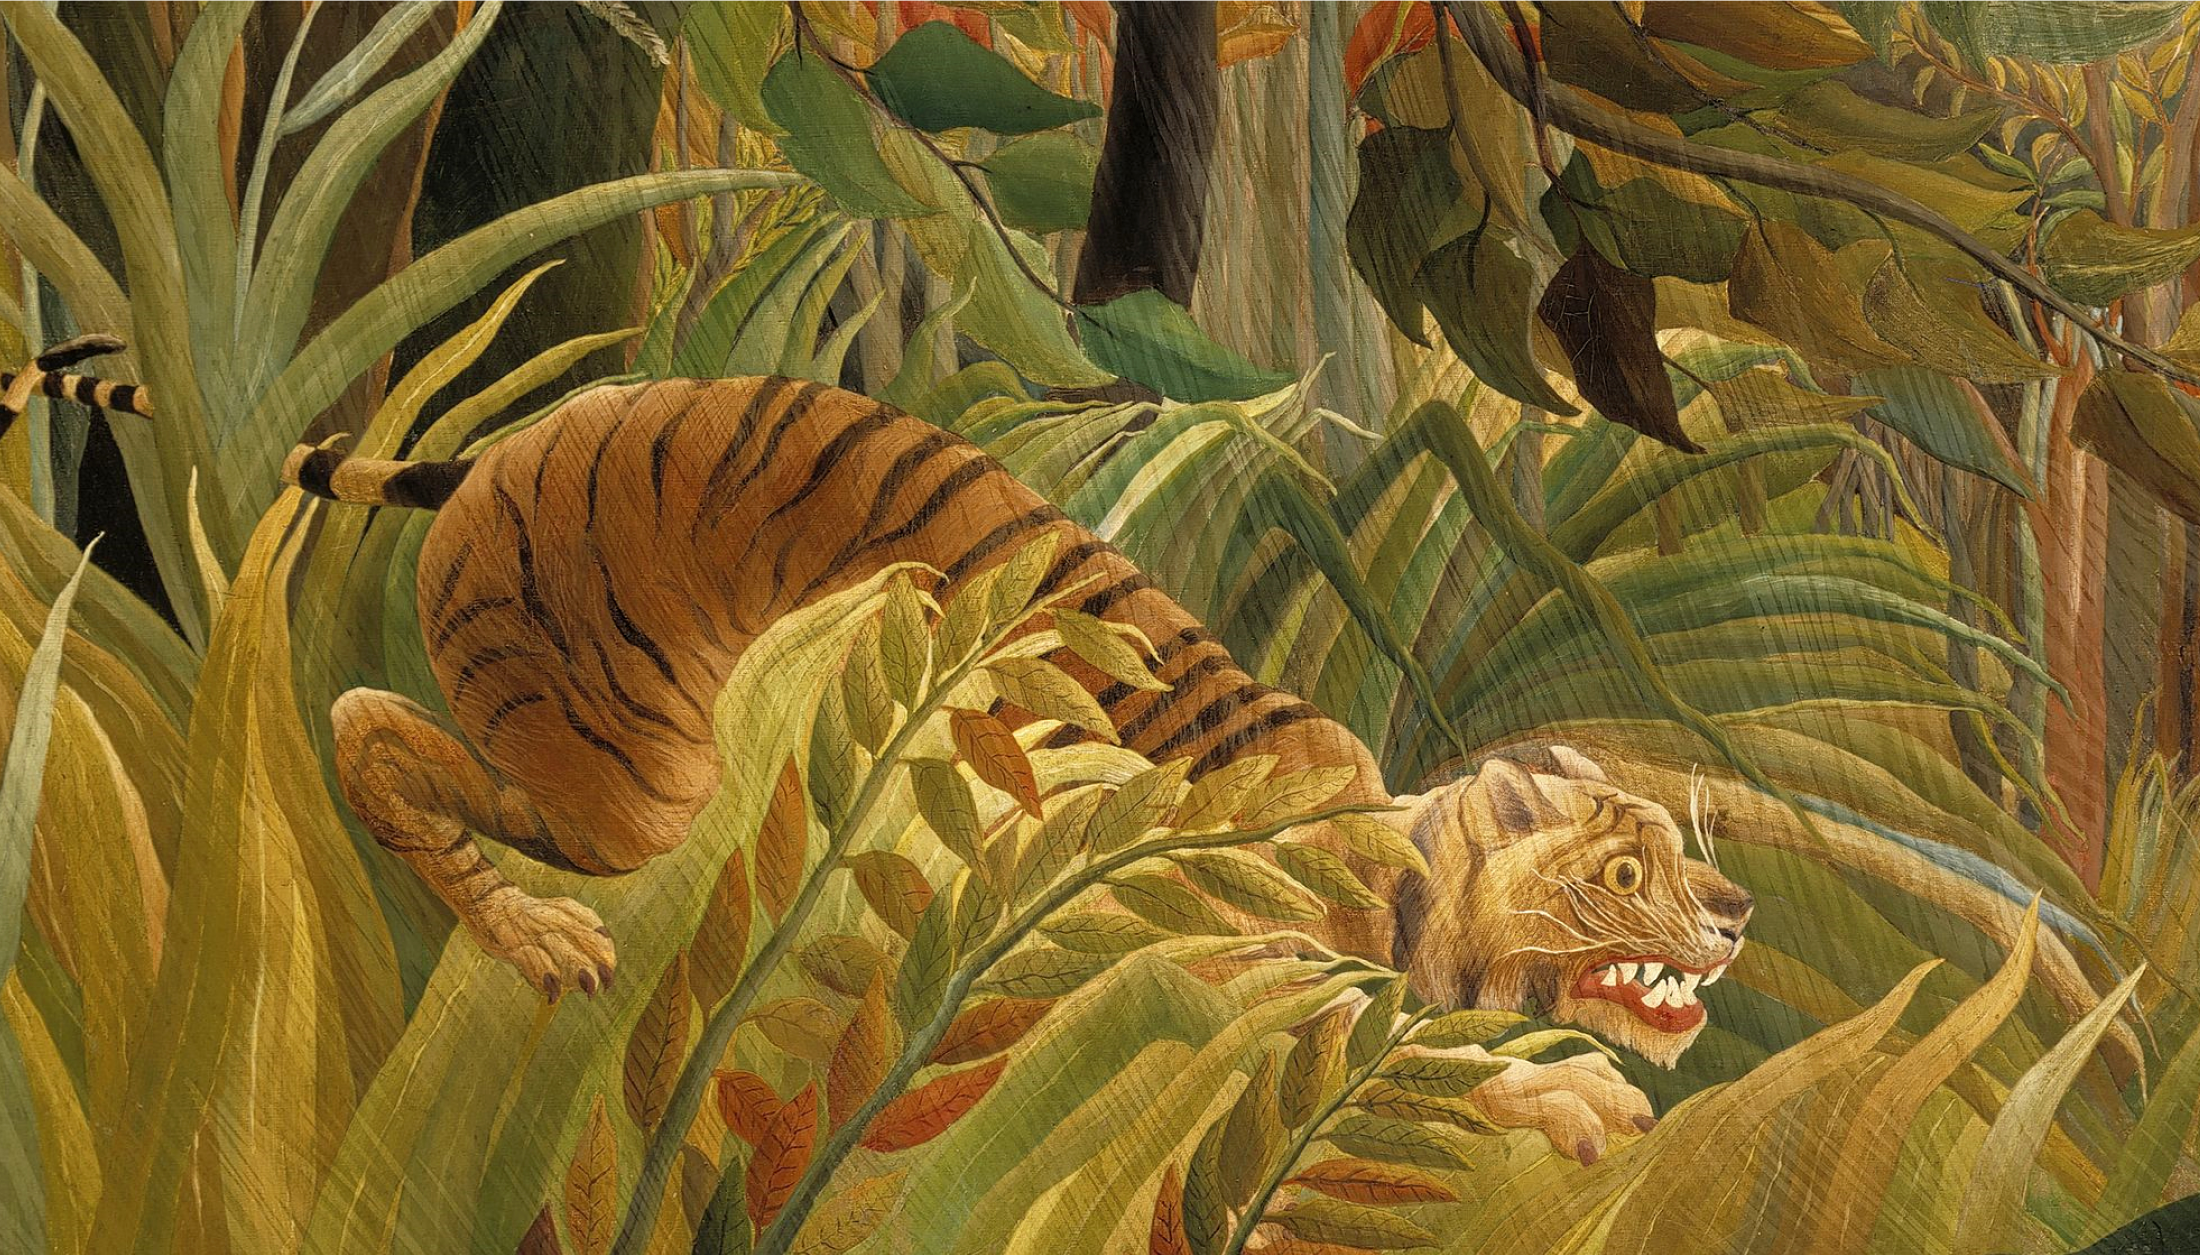 A detail from <i>Surprised!</i>, 1891, oil on canvas by Henri Rousseau (1844–1910). Image credit : The National Gallery, London